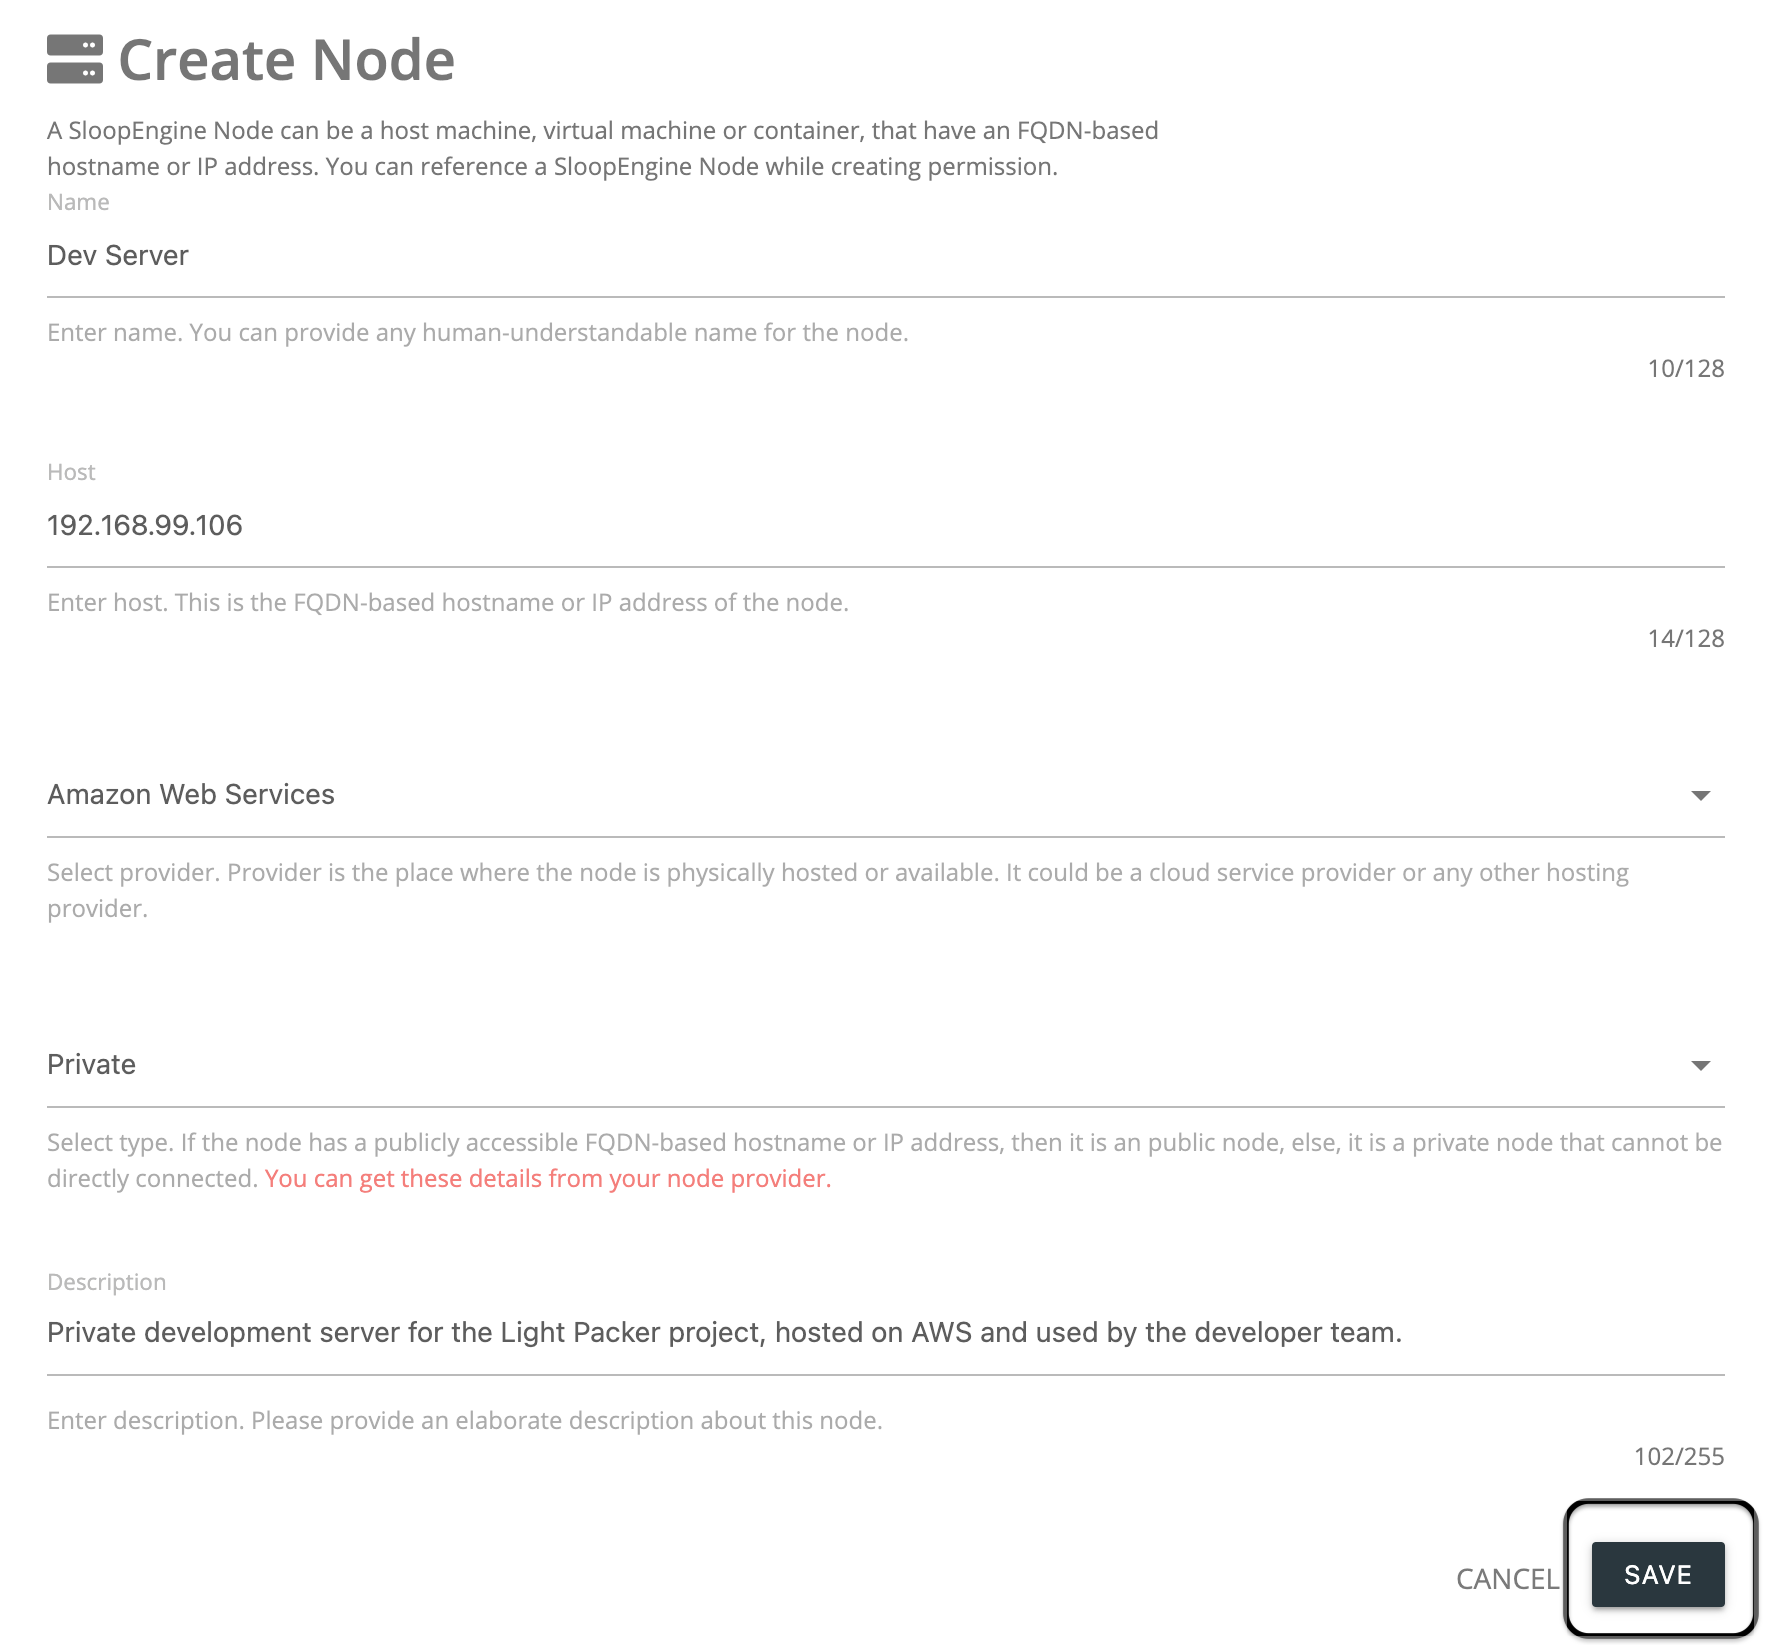 Screenshot of node creation form with valid information.